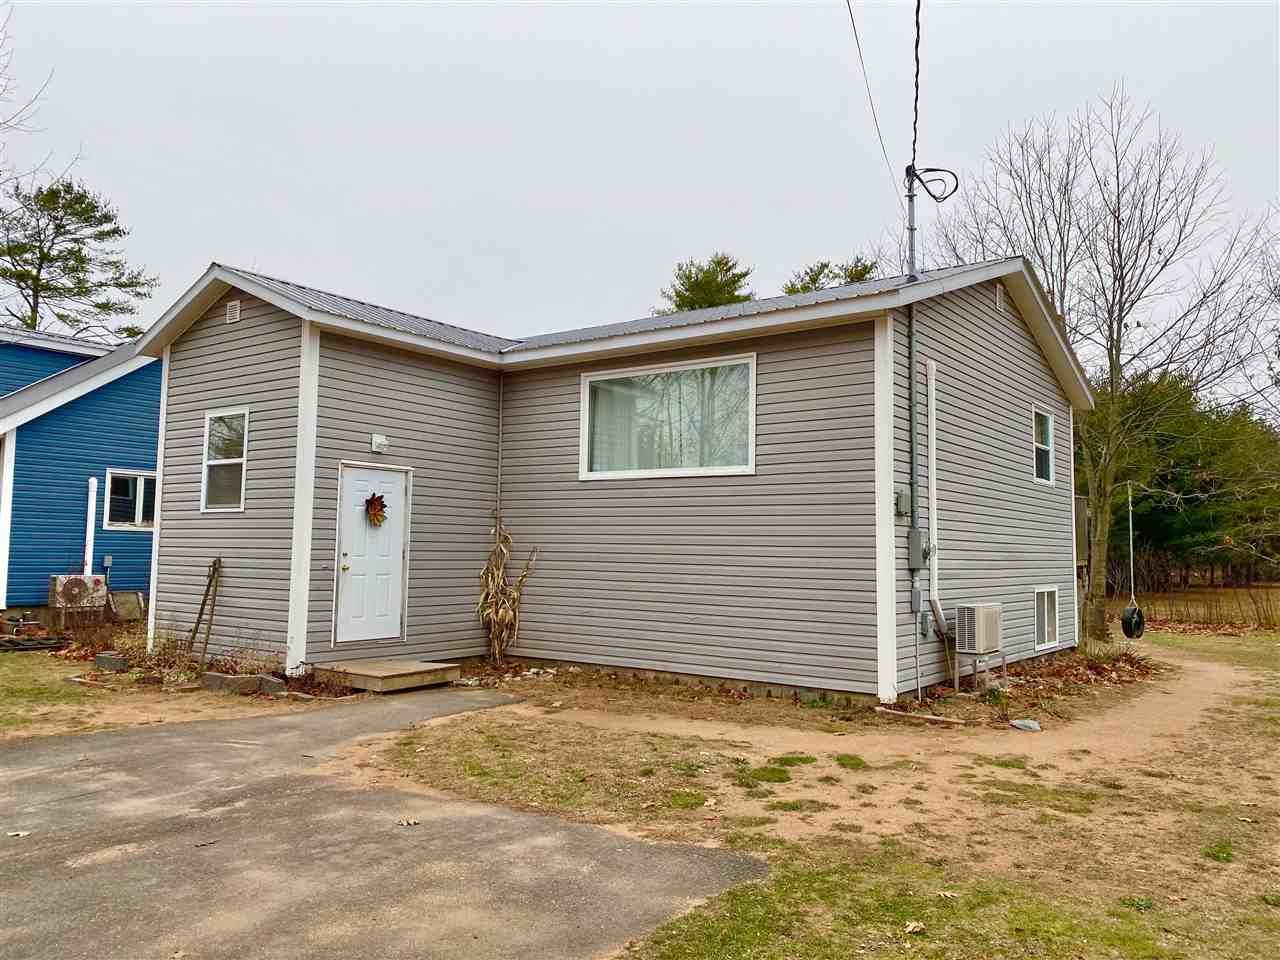 Main Photo: 1228 Pine Avenue in Aylesford: 404-Kings County Residential for sale (Annapolis Valley)  : MLS®# 202024491